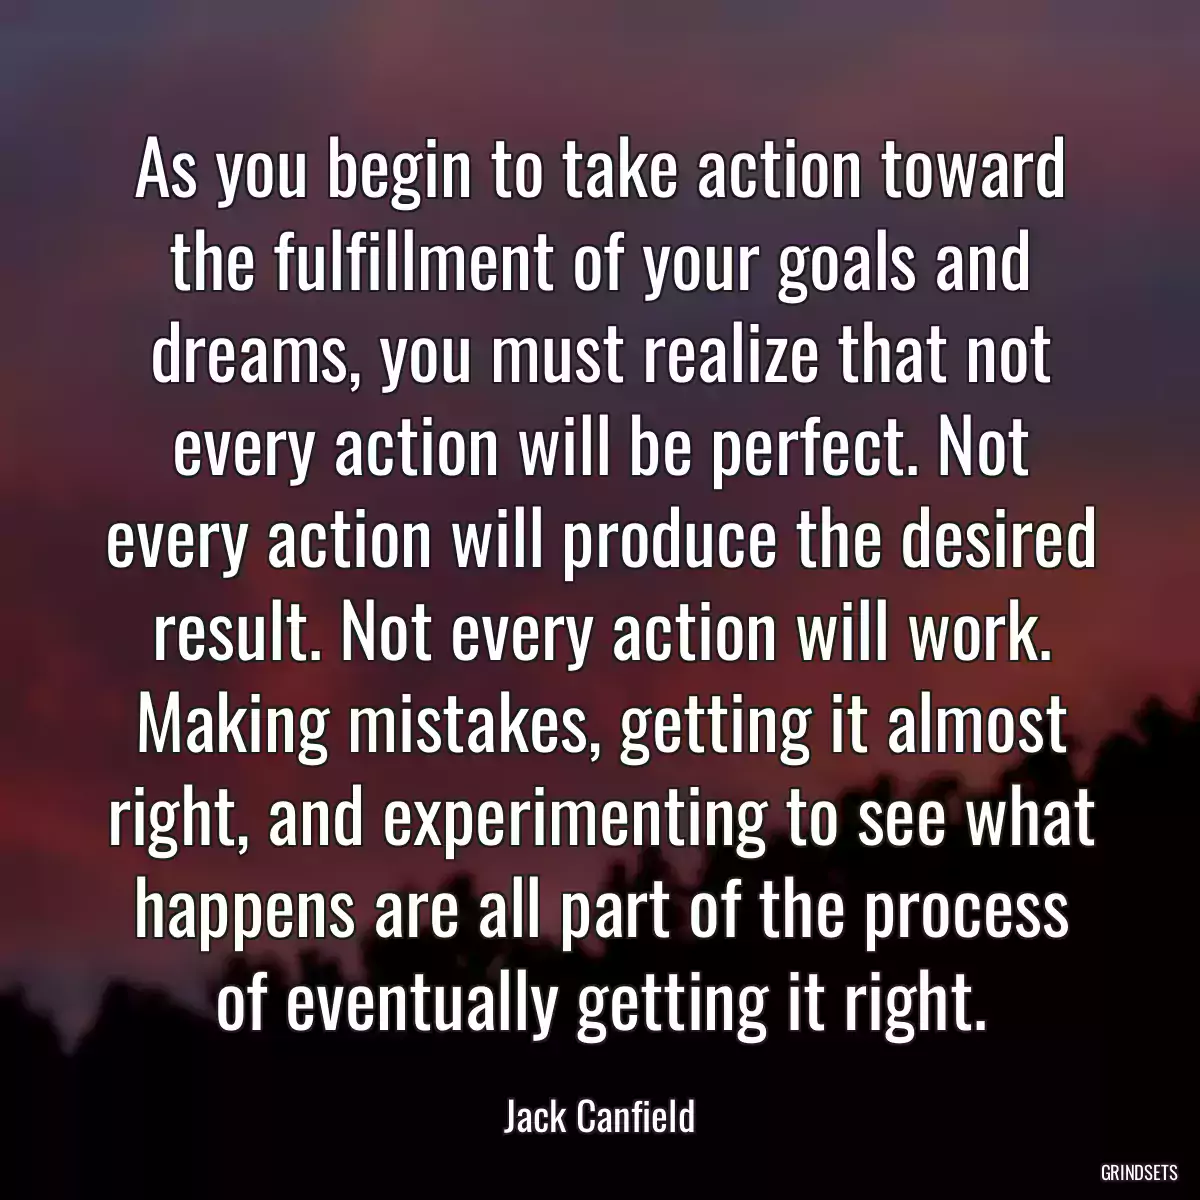 As you begin to take action toward the fulfillment of your goals and dreams, you must realize that not every action will be perfect. Not every action will produce the desired result. Not every action will work. Making mistakes, getting it almost right, and experimenting to see what happens are all part of the process of eventually getting it right.